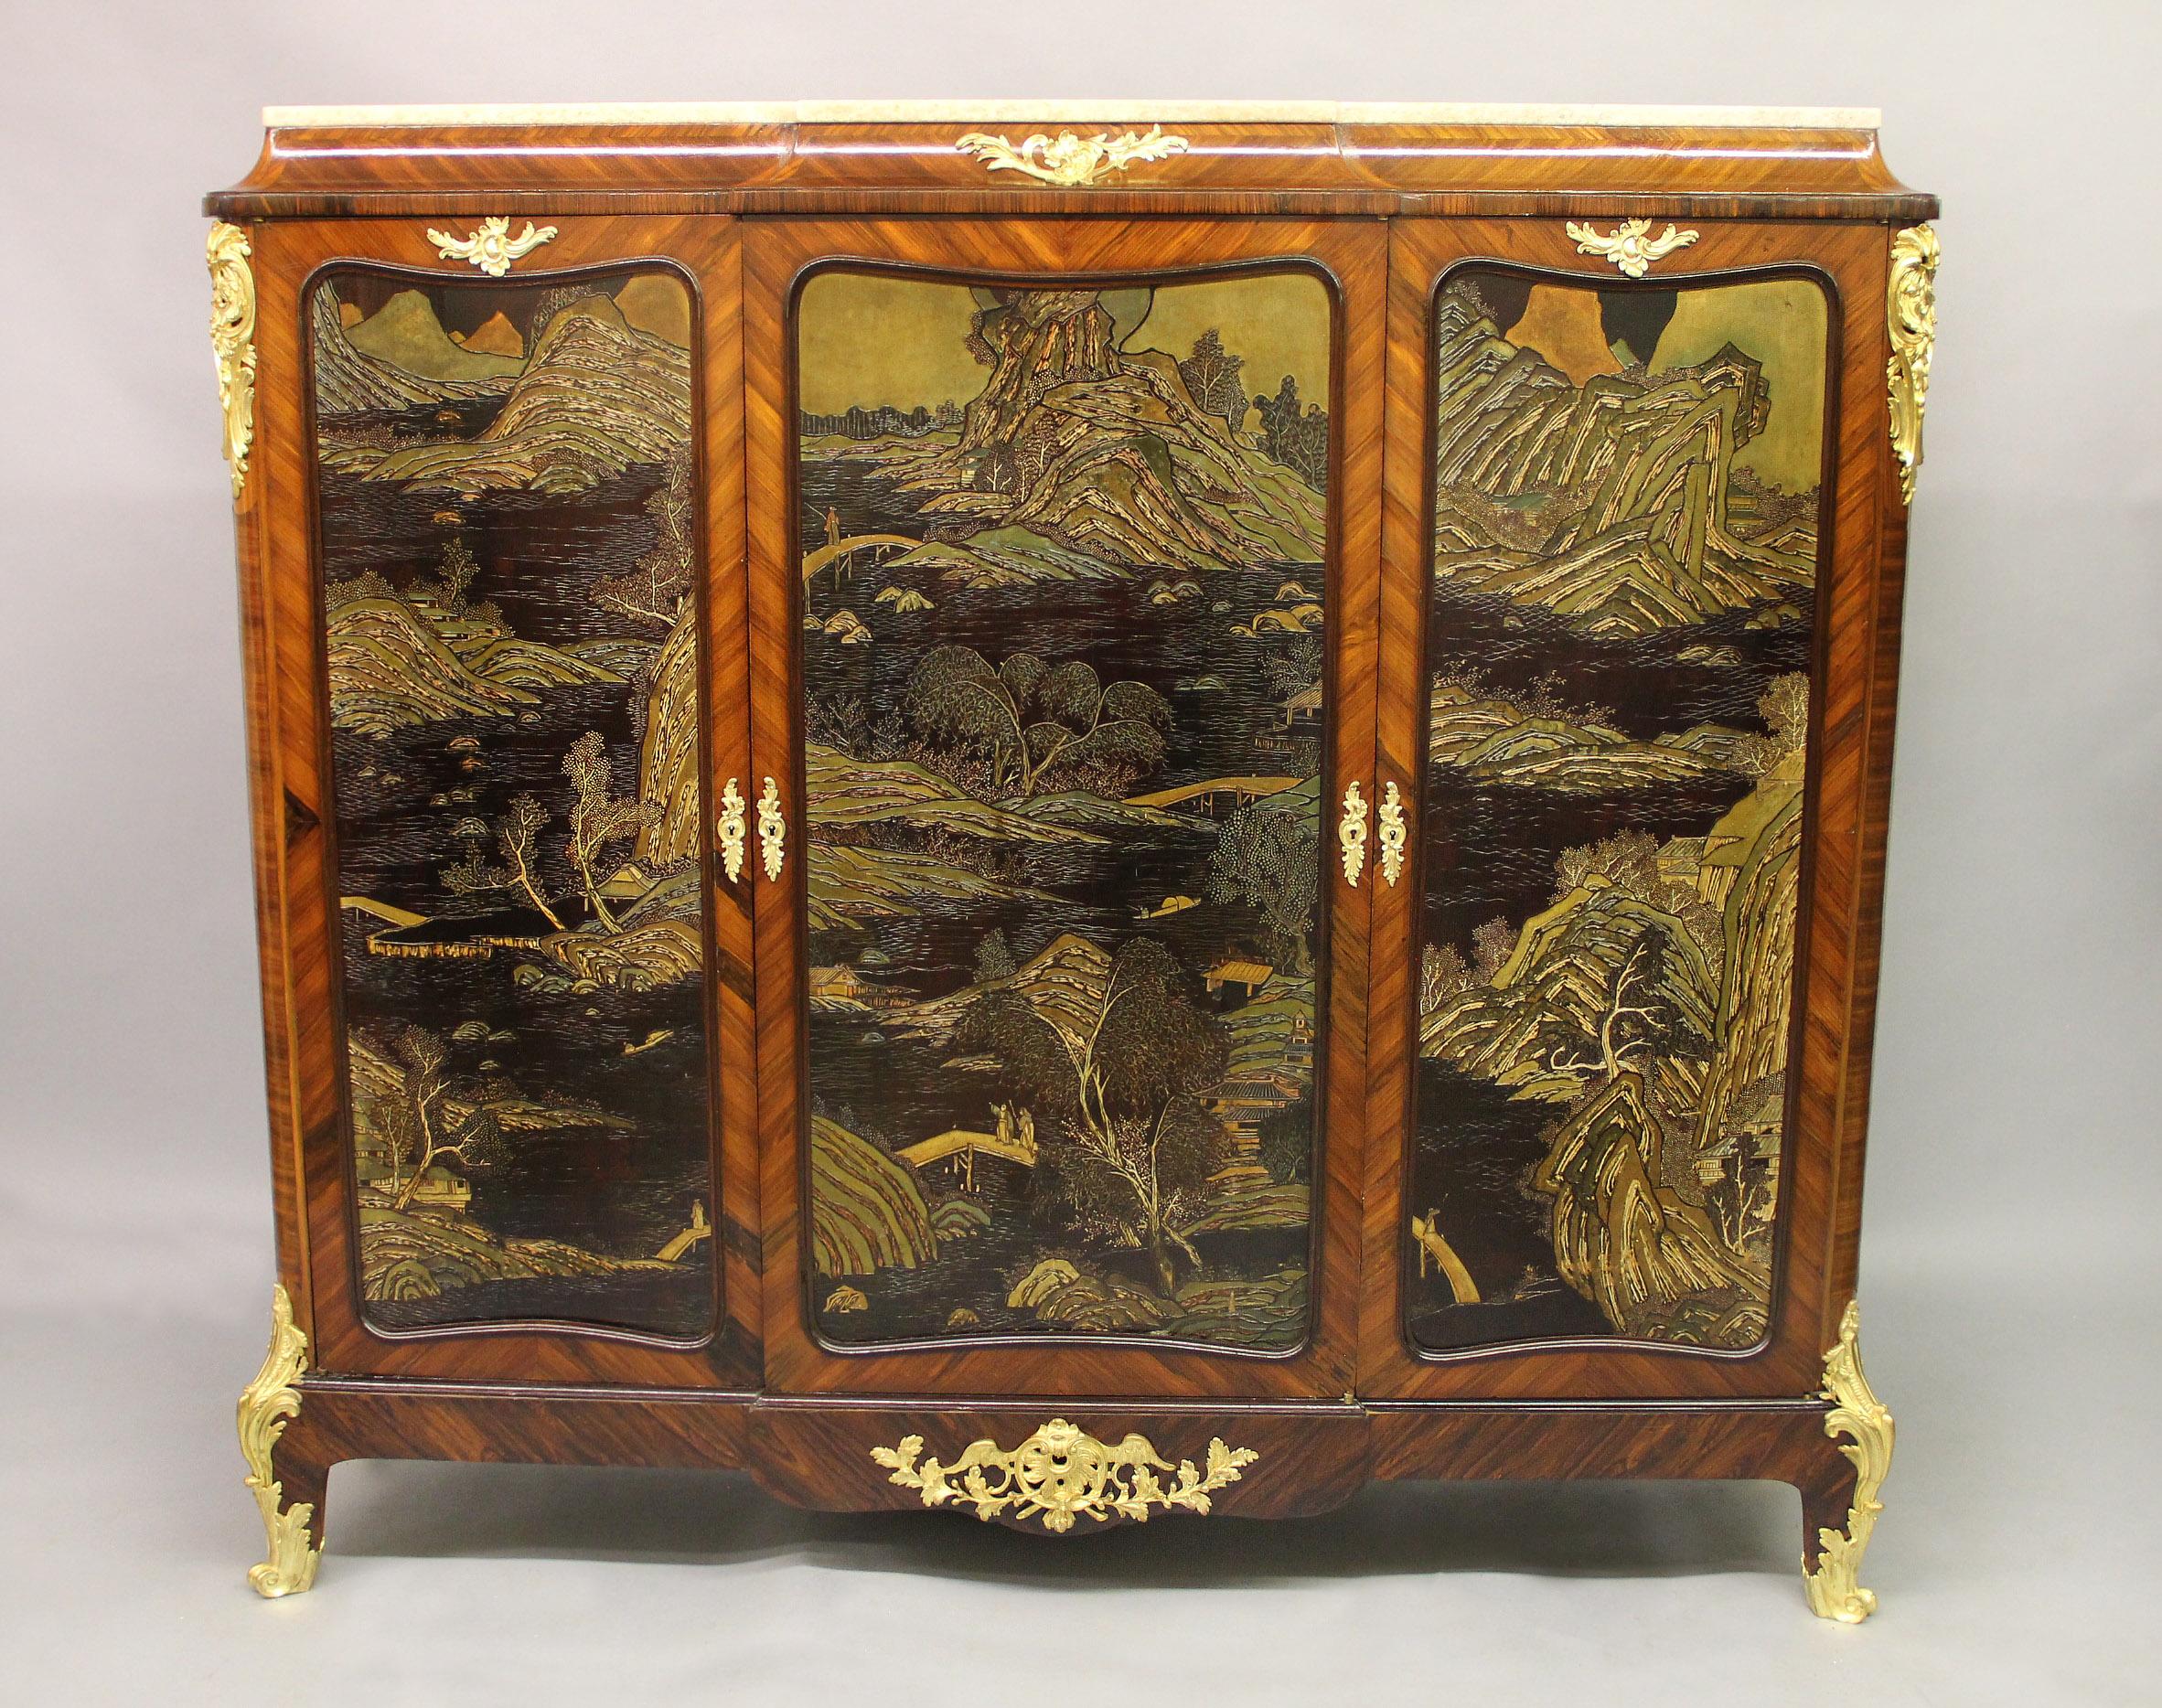 An Interesting late 19th century gilt bronze mounted Transitional style Chinoiserie cabinet by L. Bontemps

L. Bontemps

Marble top above three high doors, each with a coromandel landscape scene with people at leisure, the sides quarter